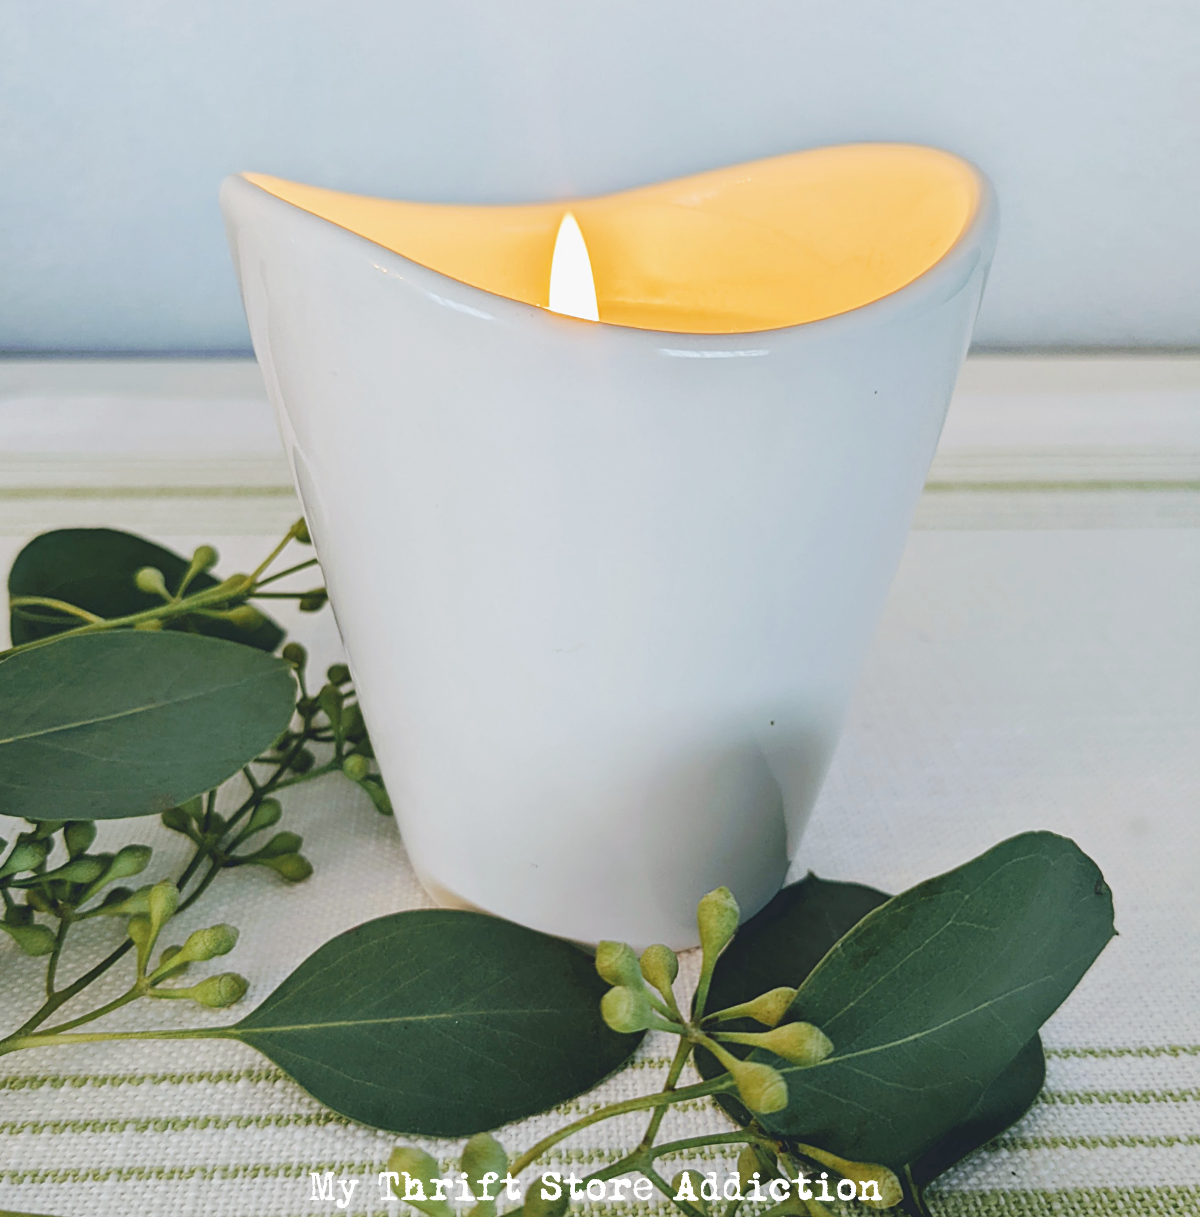 How to reuse leftover candles